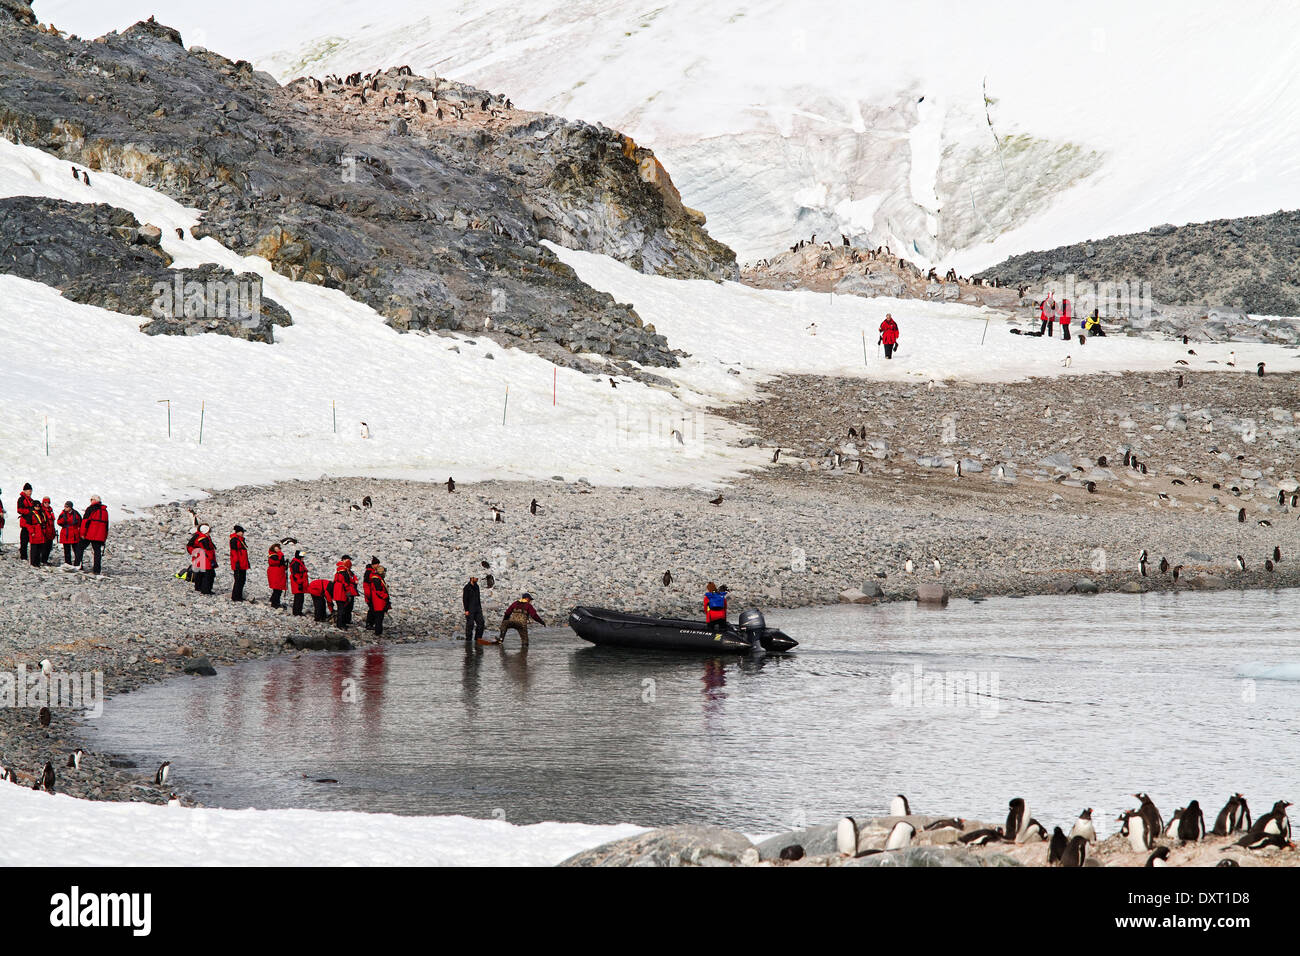 Antarctica tourism among the landscape of Antarctic iceberg, glacier, ice, and penguin with tourists preparing to board zodiacs. Stock Photo